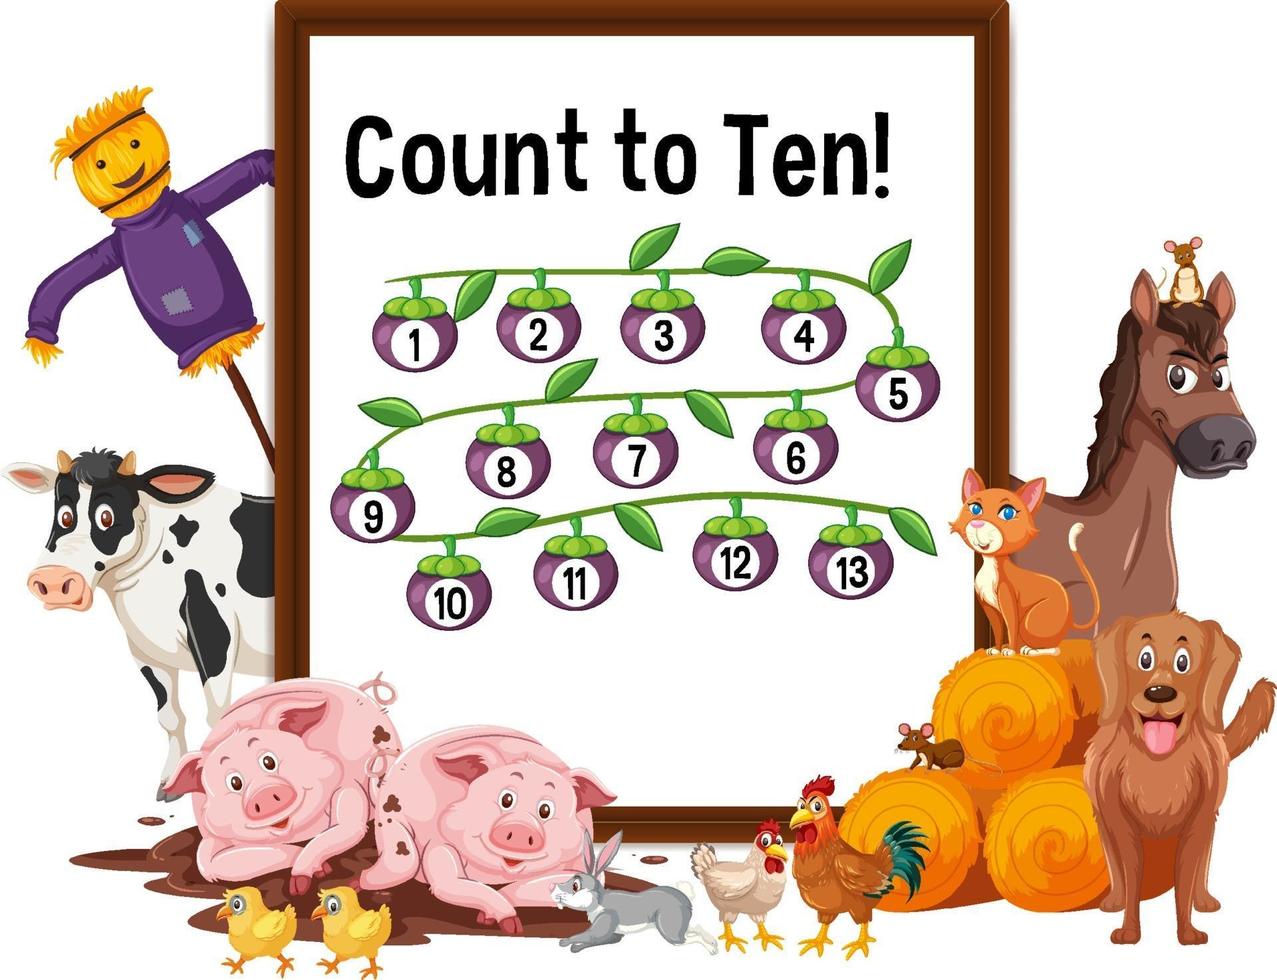 Count to Ten board with farm animals vector